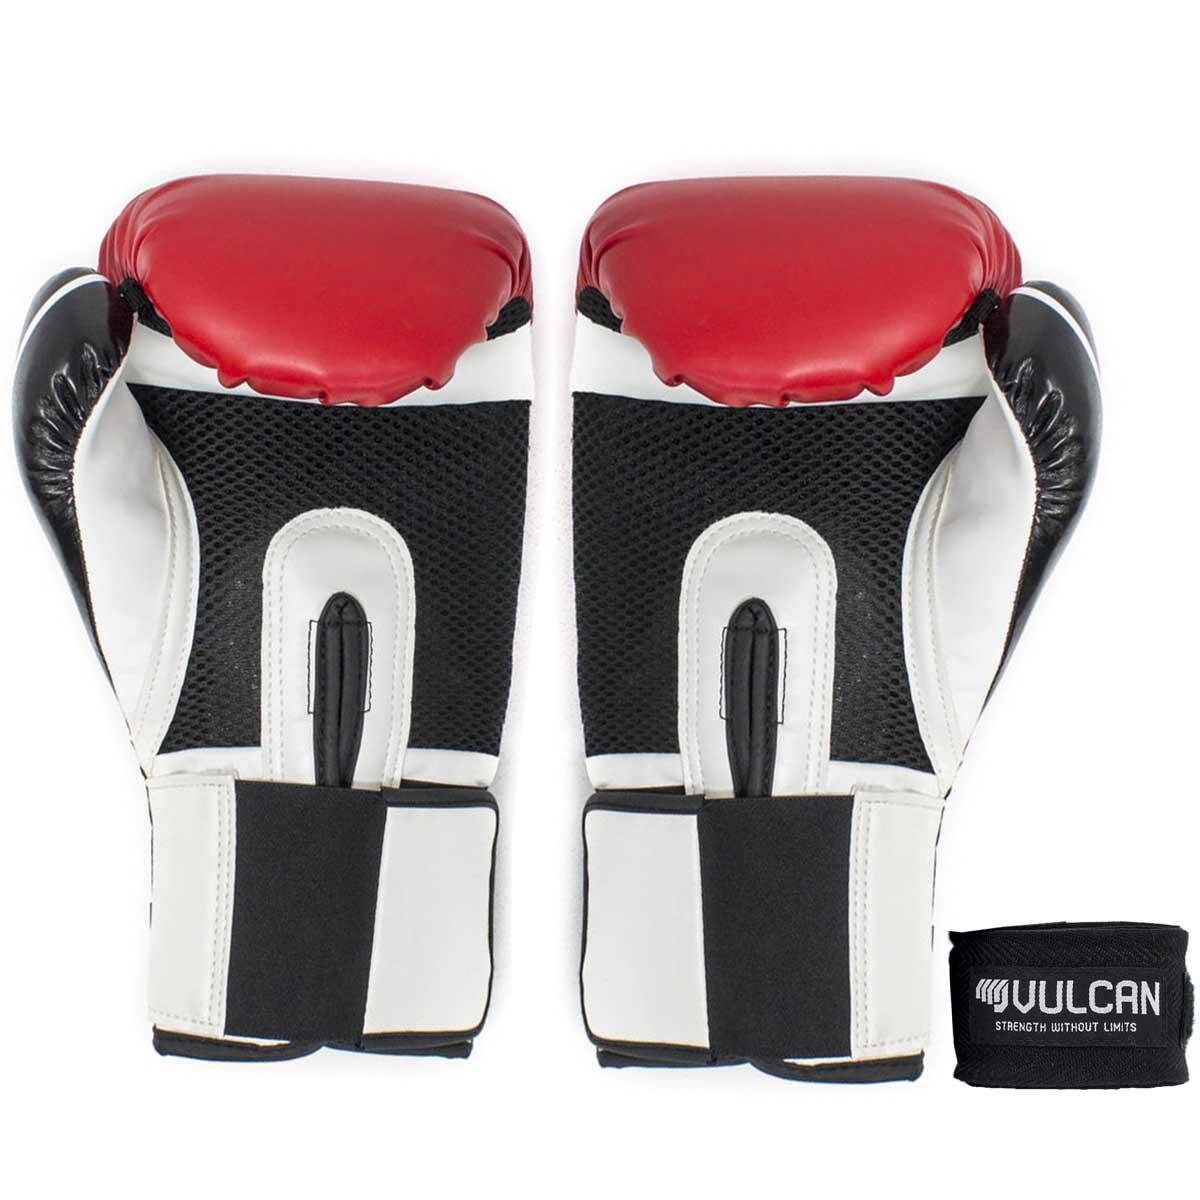 BOXING GLOVES 16oz RED/BLACK WITH HANDWRAPS 6/7